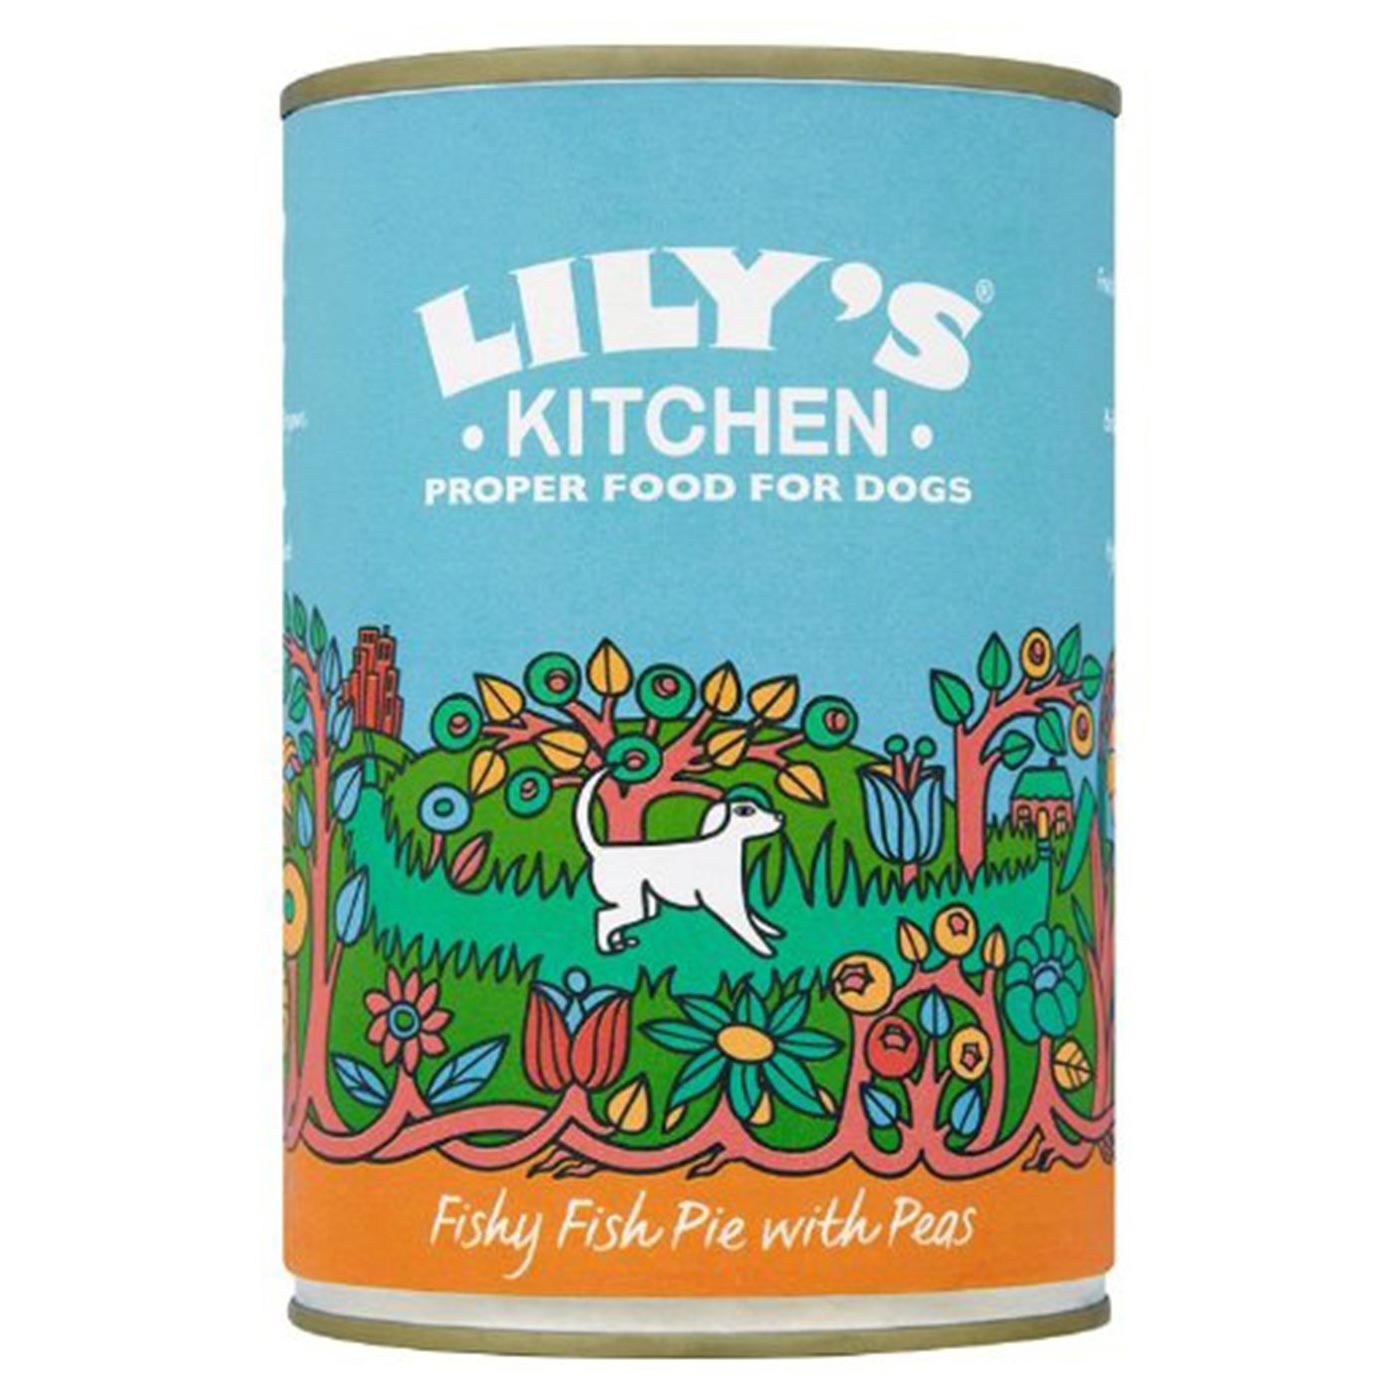 Lily's Kitchen Fishy Fish Pie with Peas Dog Food